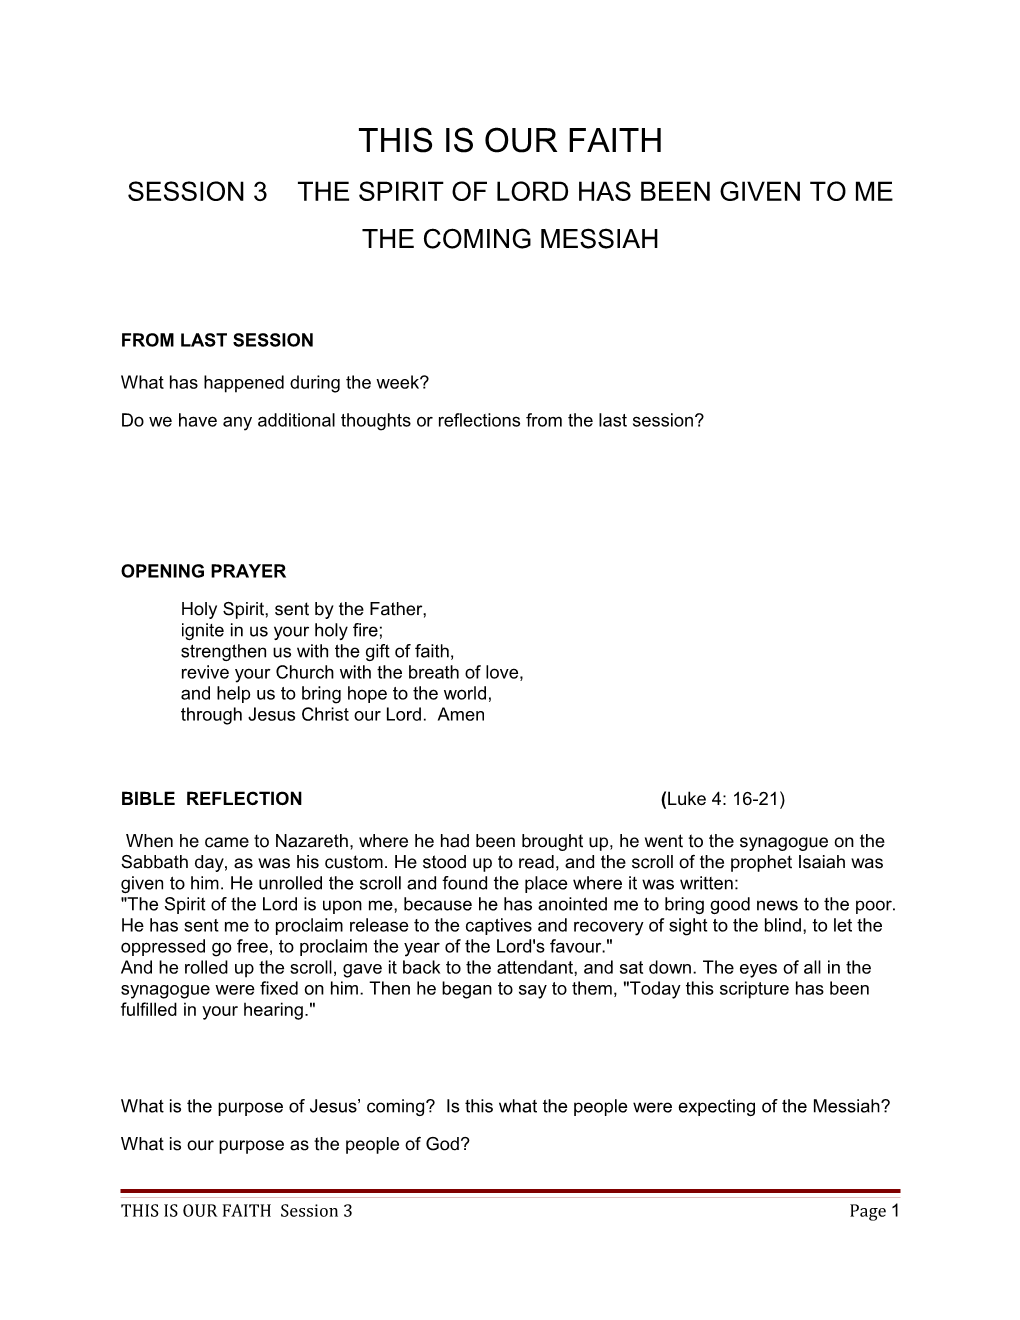 Session 3 the Spirit of Lord Has Been Given to Me